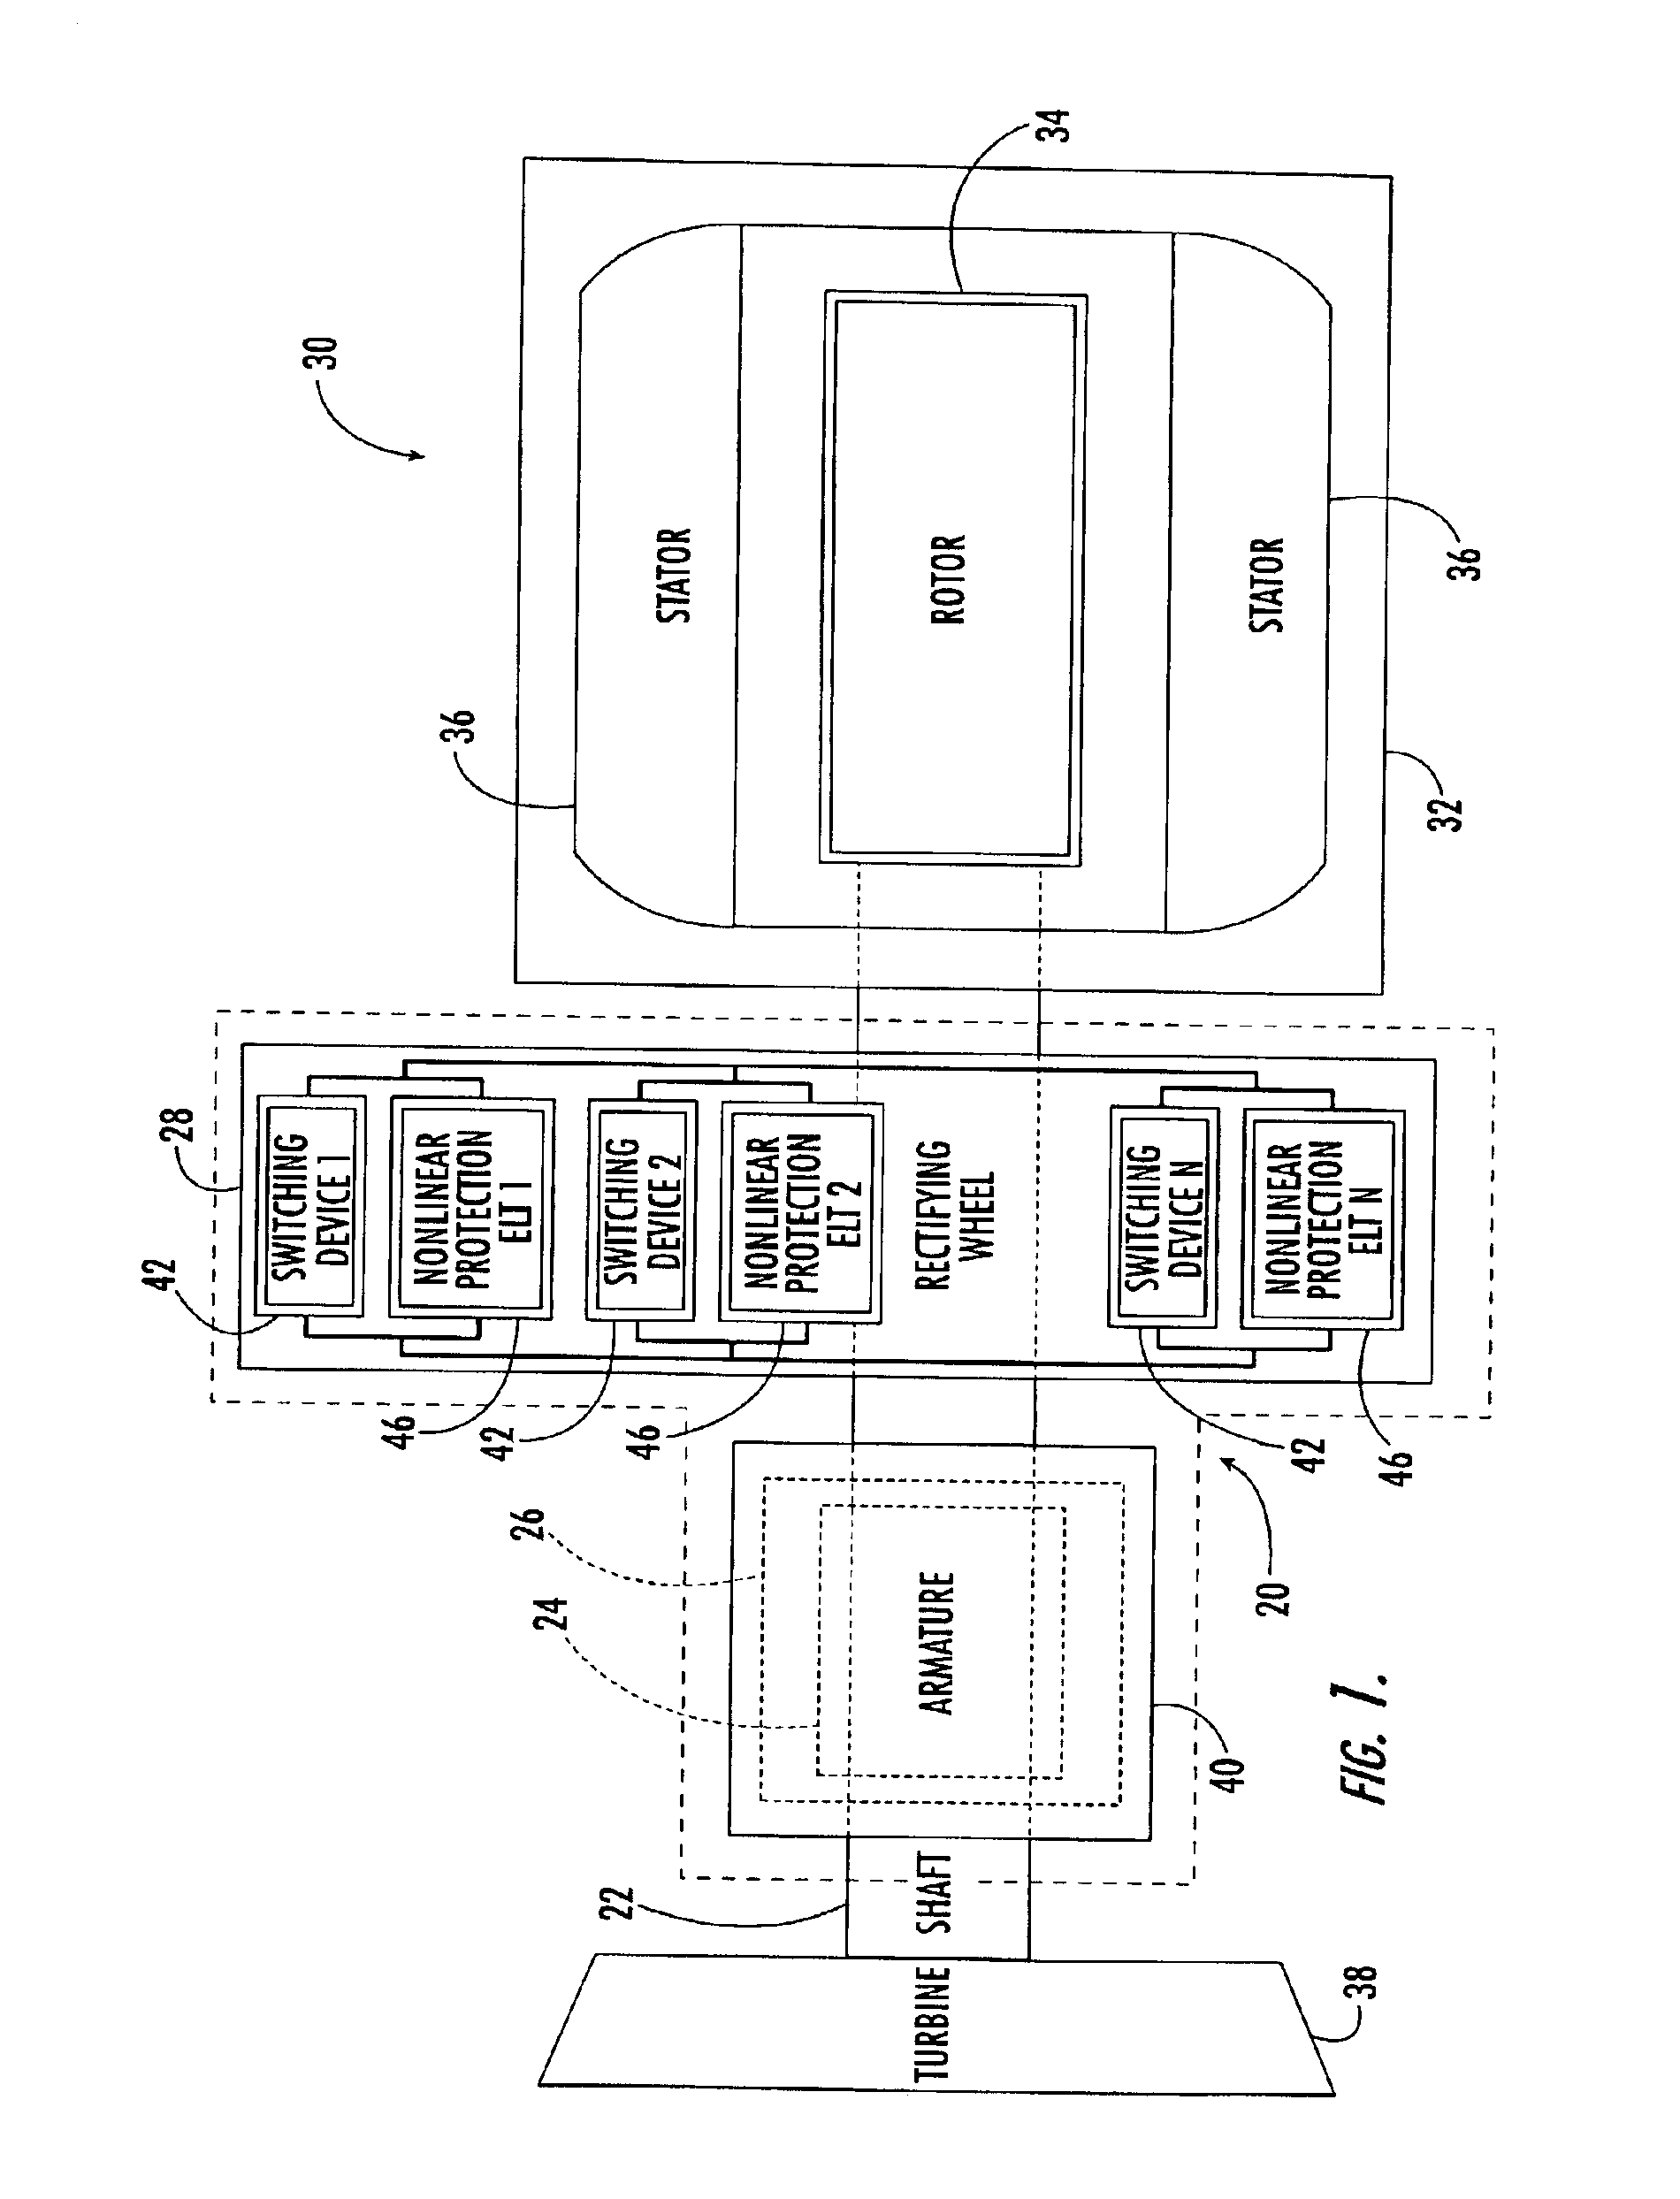 Protected exciter for an electrical power generator and associated methods